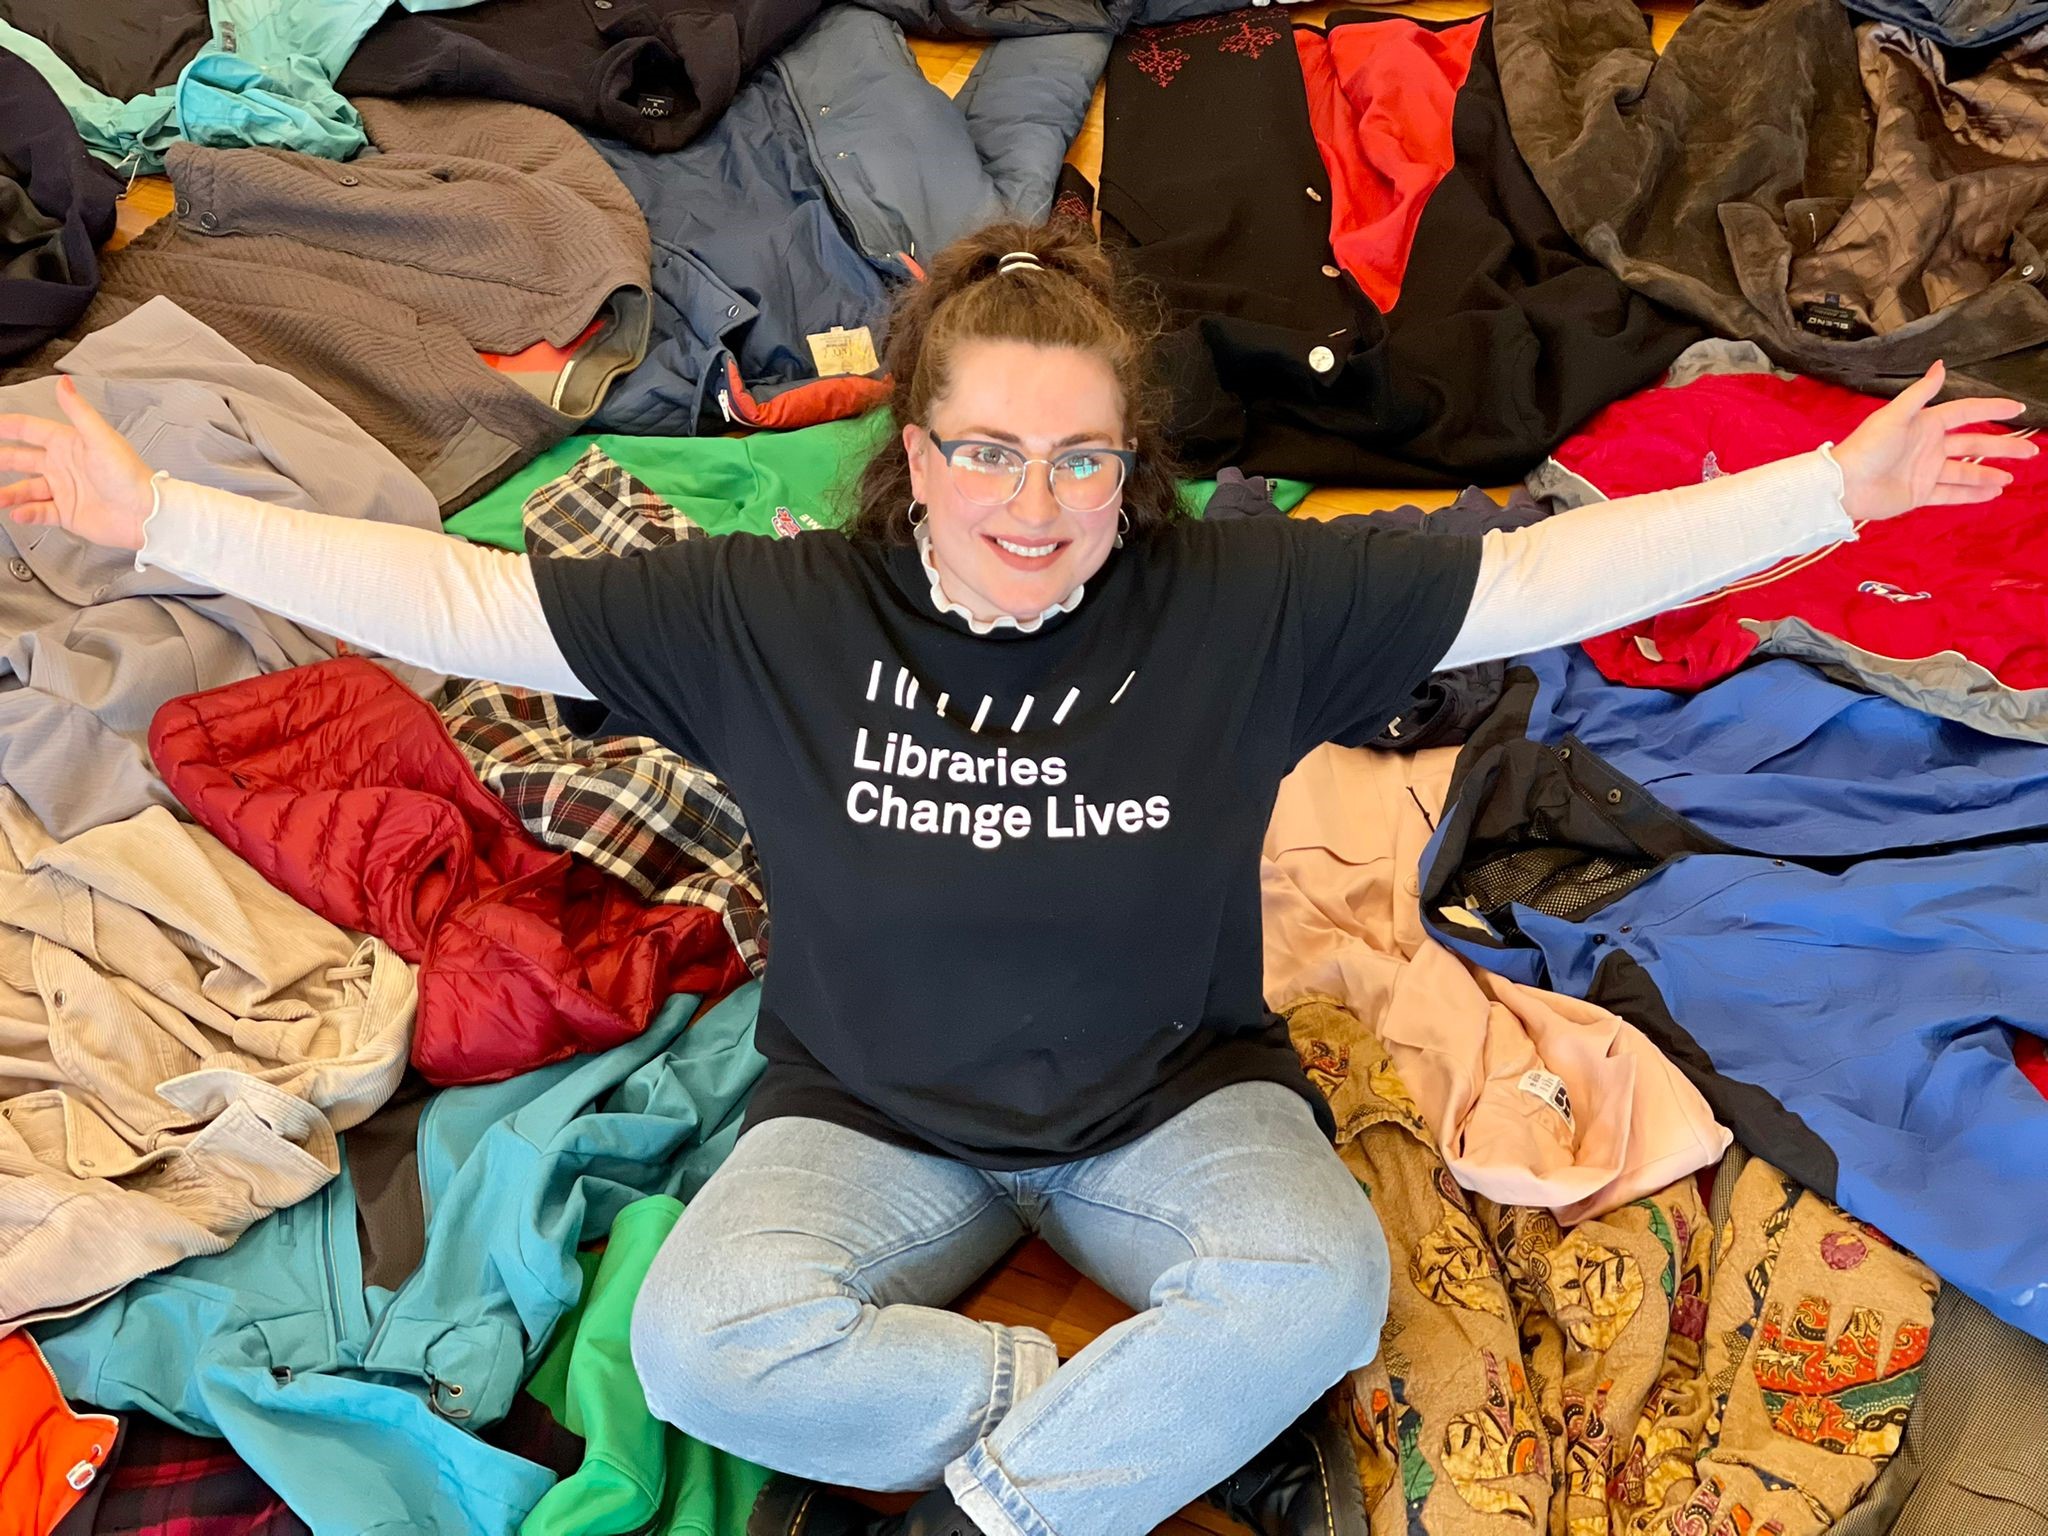 A Yarra Libraries staff member wearing a black 'Libraries Change Lives' t-shirt sits on a pile of numerous winter coats with their arms outstretched. 